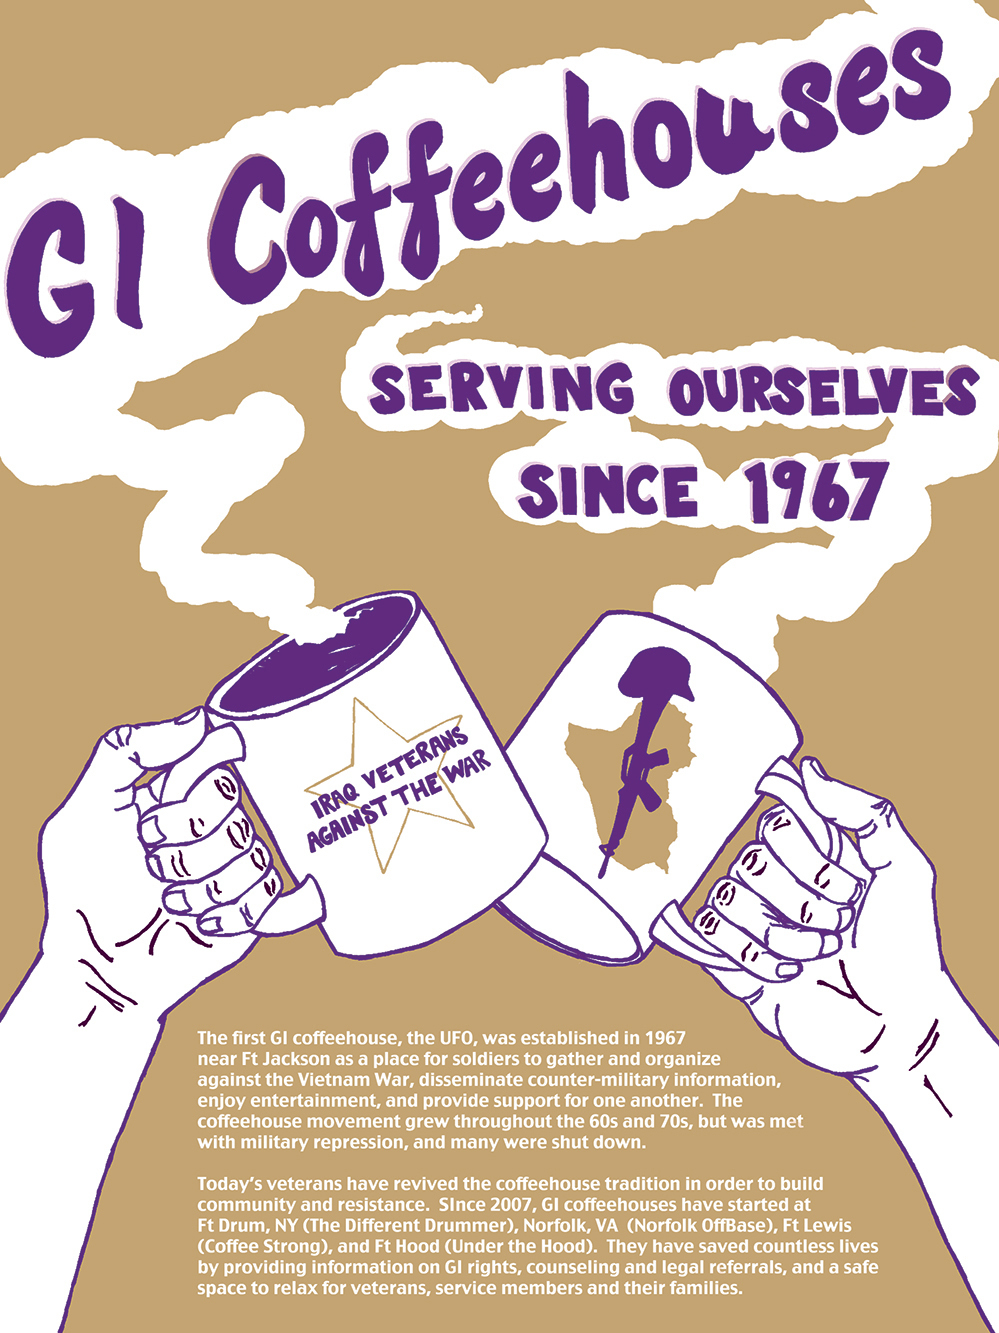 During the Vietnam War, GI coffeehouses located near military posts became a place for soldiers to gather and organize against the war. Since 2007, veterans of the wars in Iraq and Afghanistan have revived this GI coffeehouse tradition in various locations.